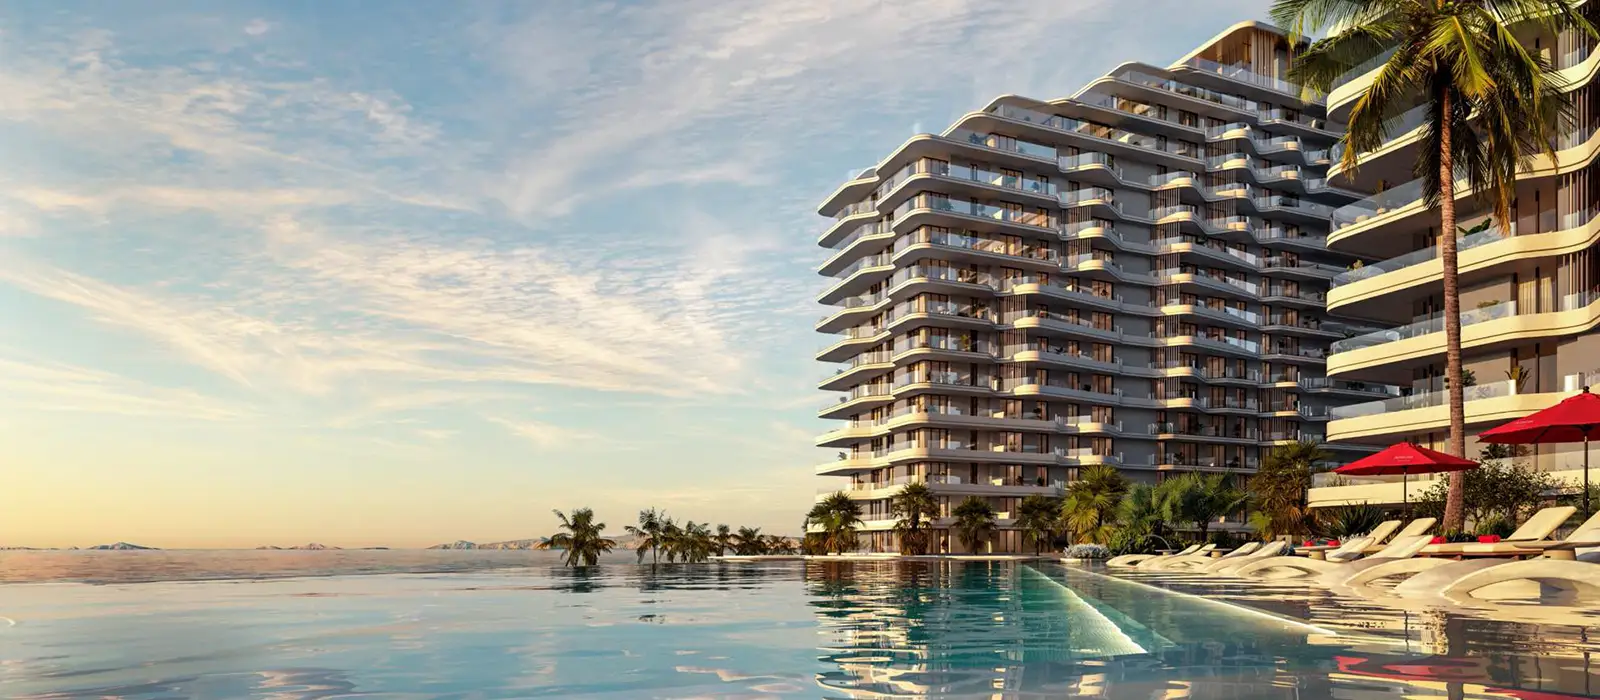 Rosso Bay Residences offers 5-star resort-style se